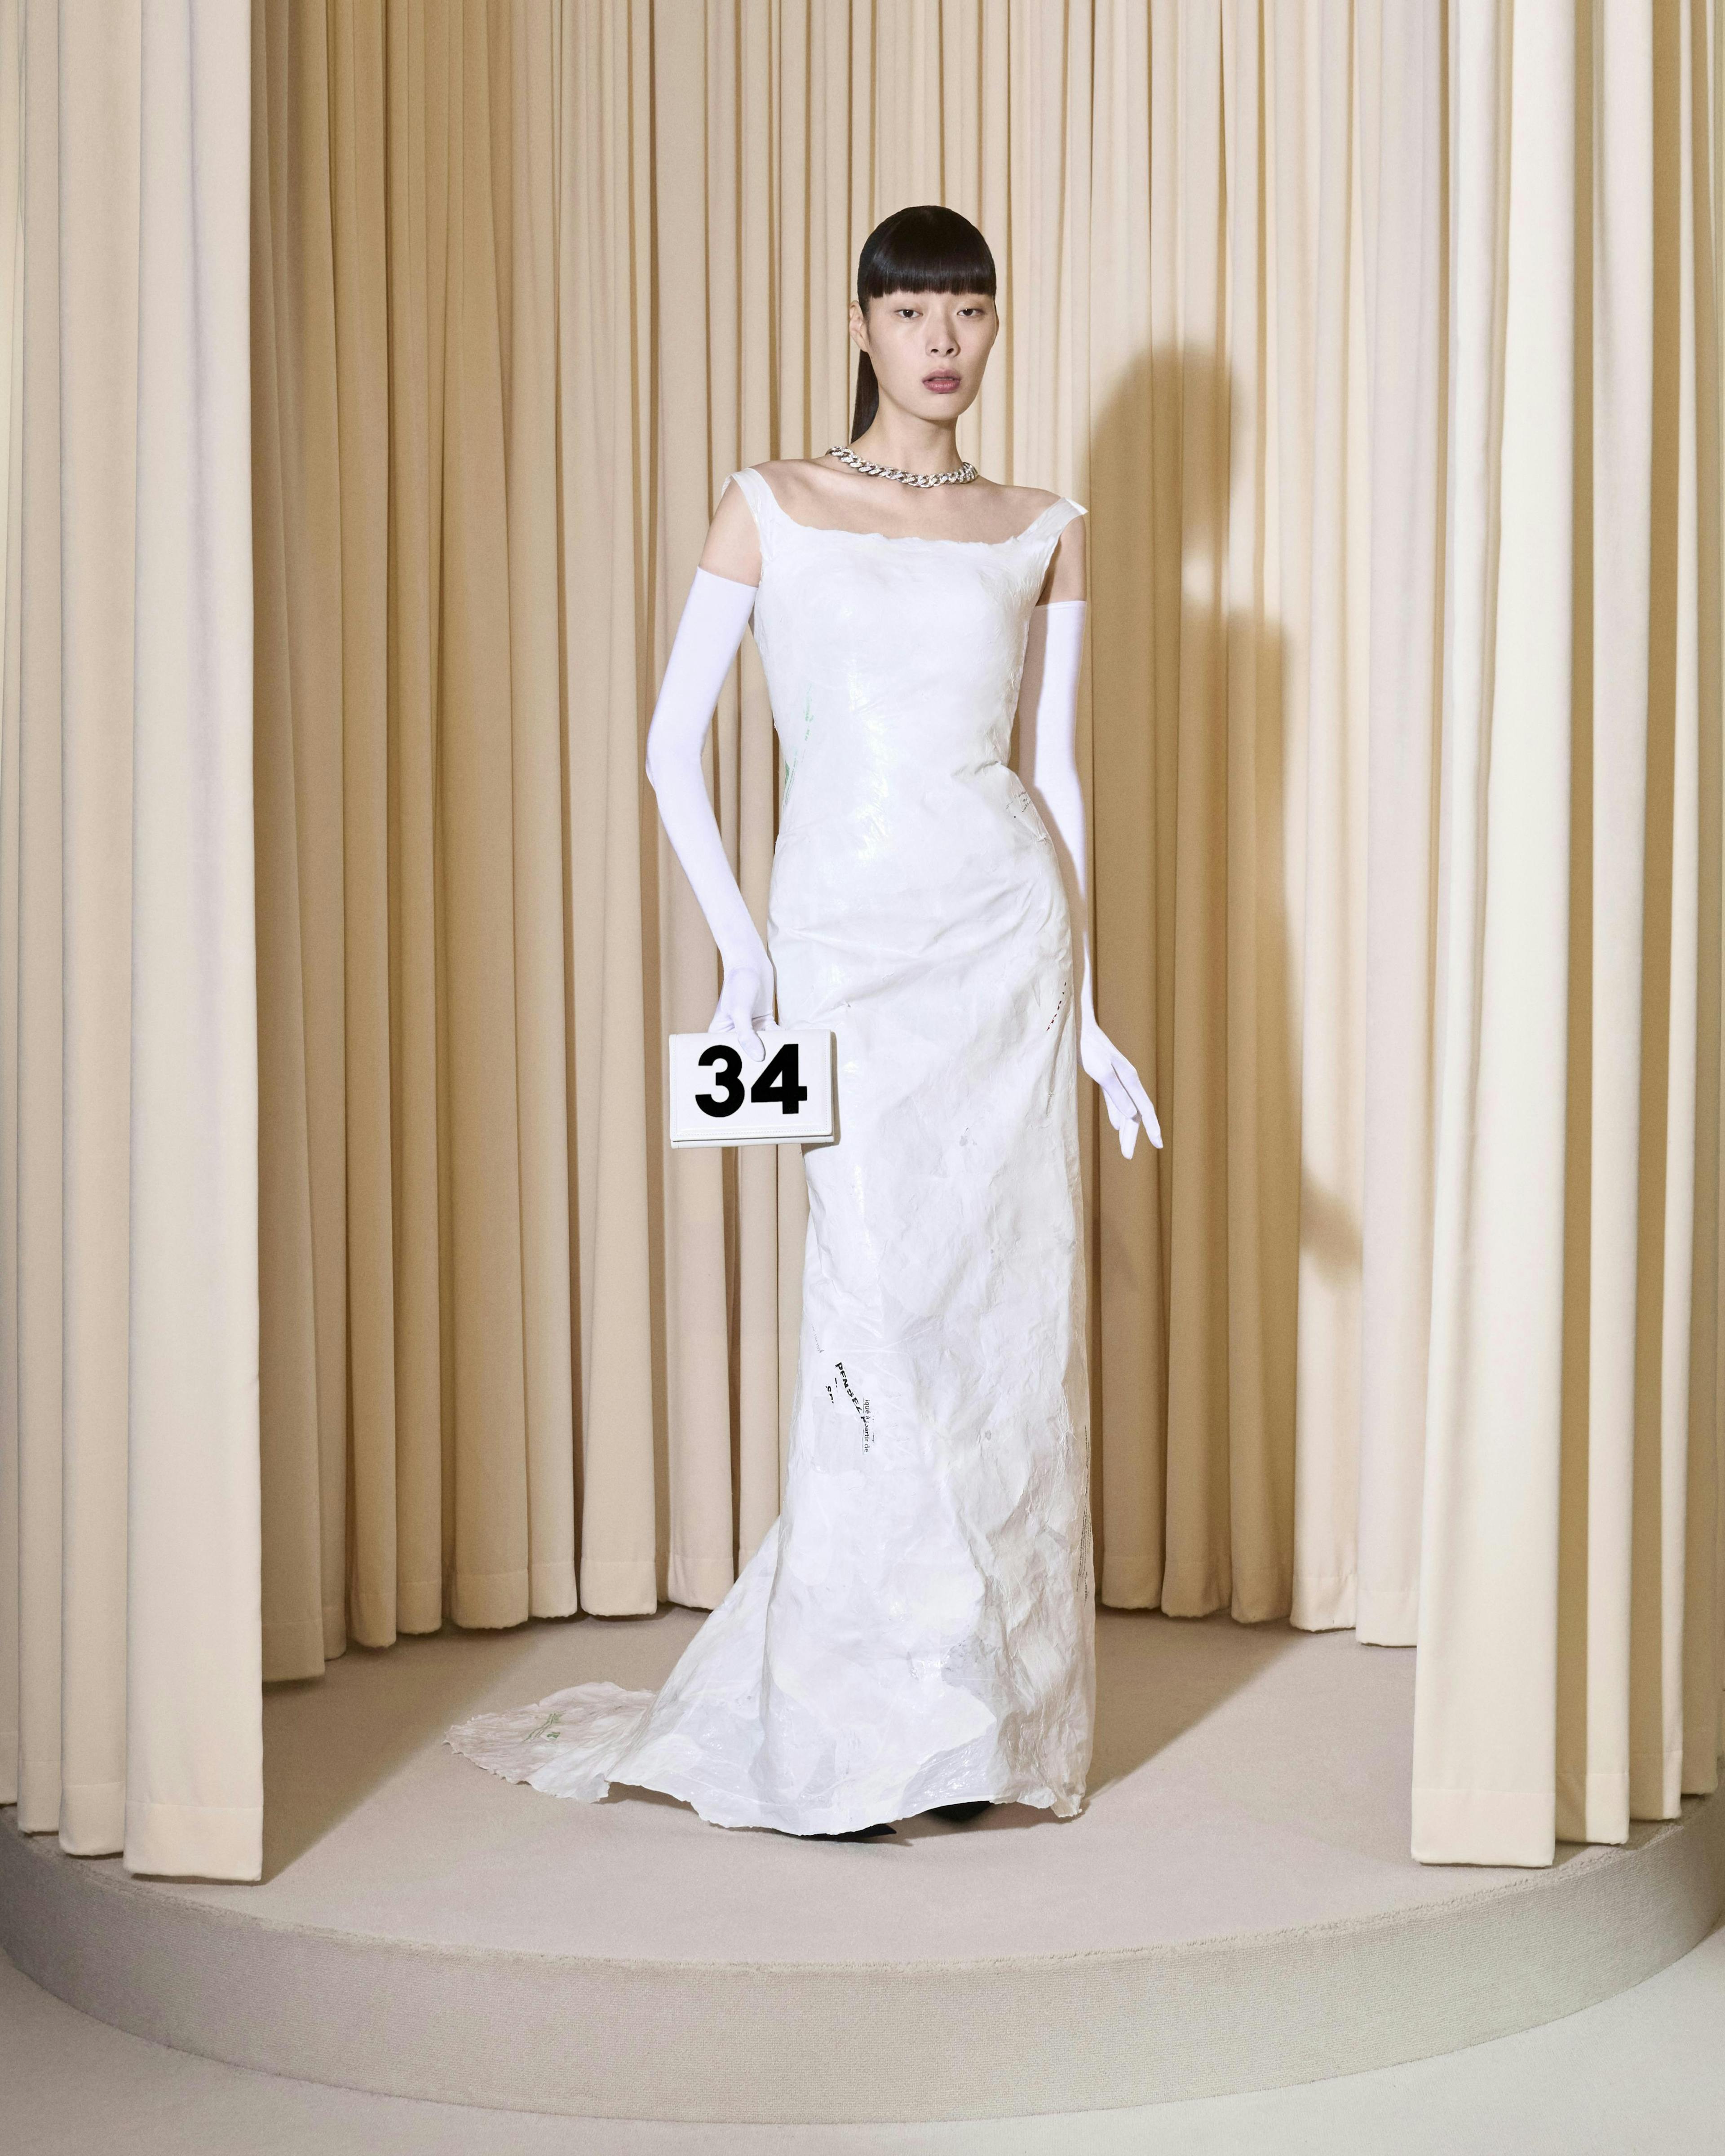 dress fashion formal wear gown wedding gown evening dress adult bride person woman